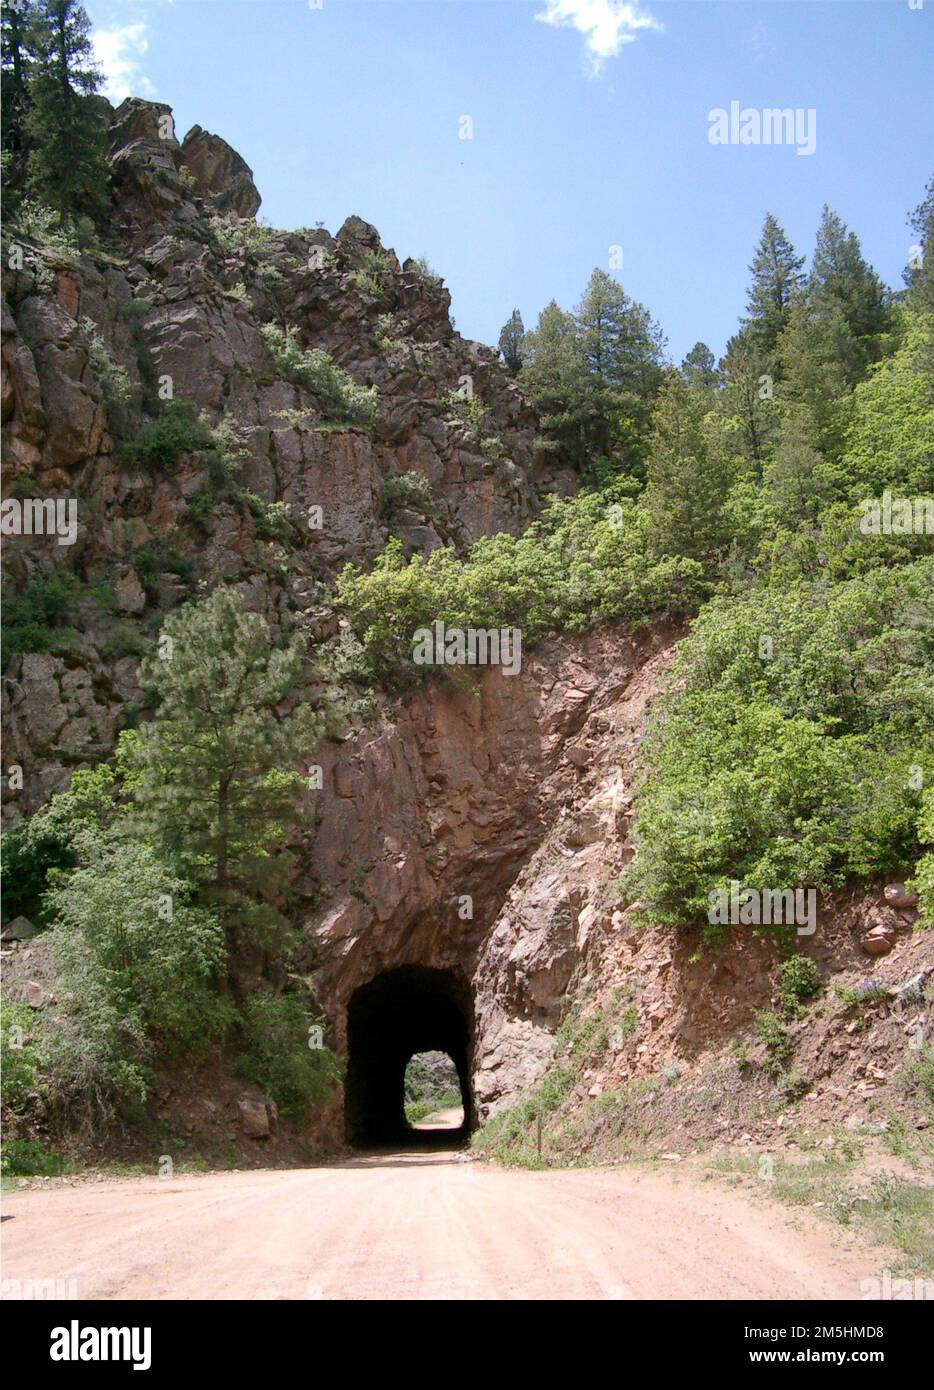 . Phantom Canyon Road, a dirt-surfaced road, passes through a narrow tunnel carved through a pale red-rock slope on a sunny day in summer. Colorado (38.520° N 105.125° W) Stock Photo